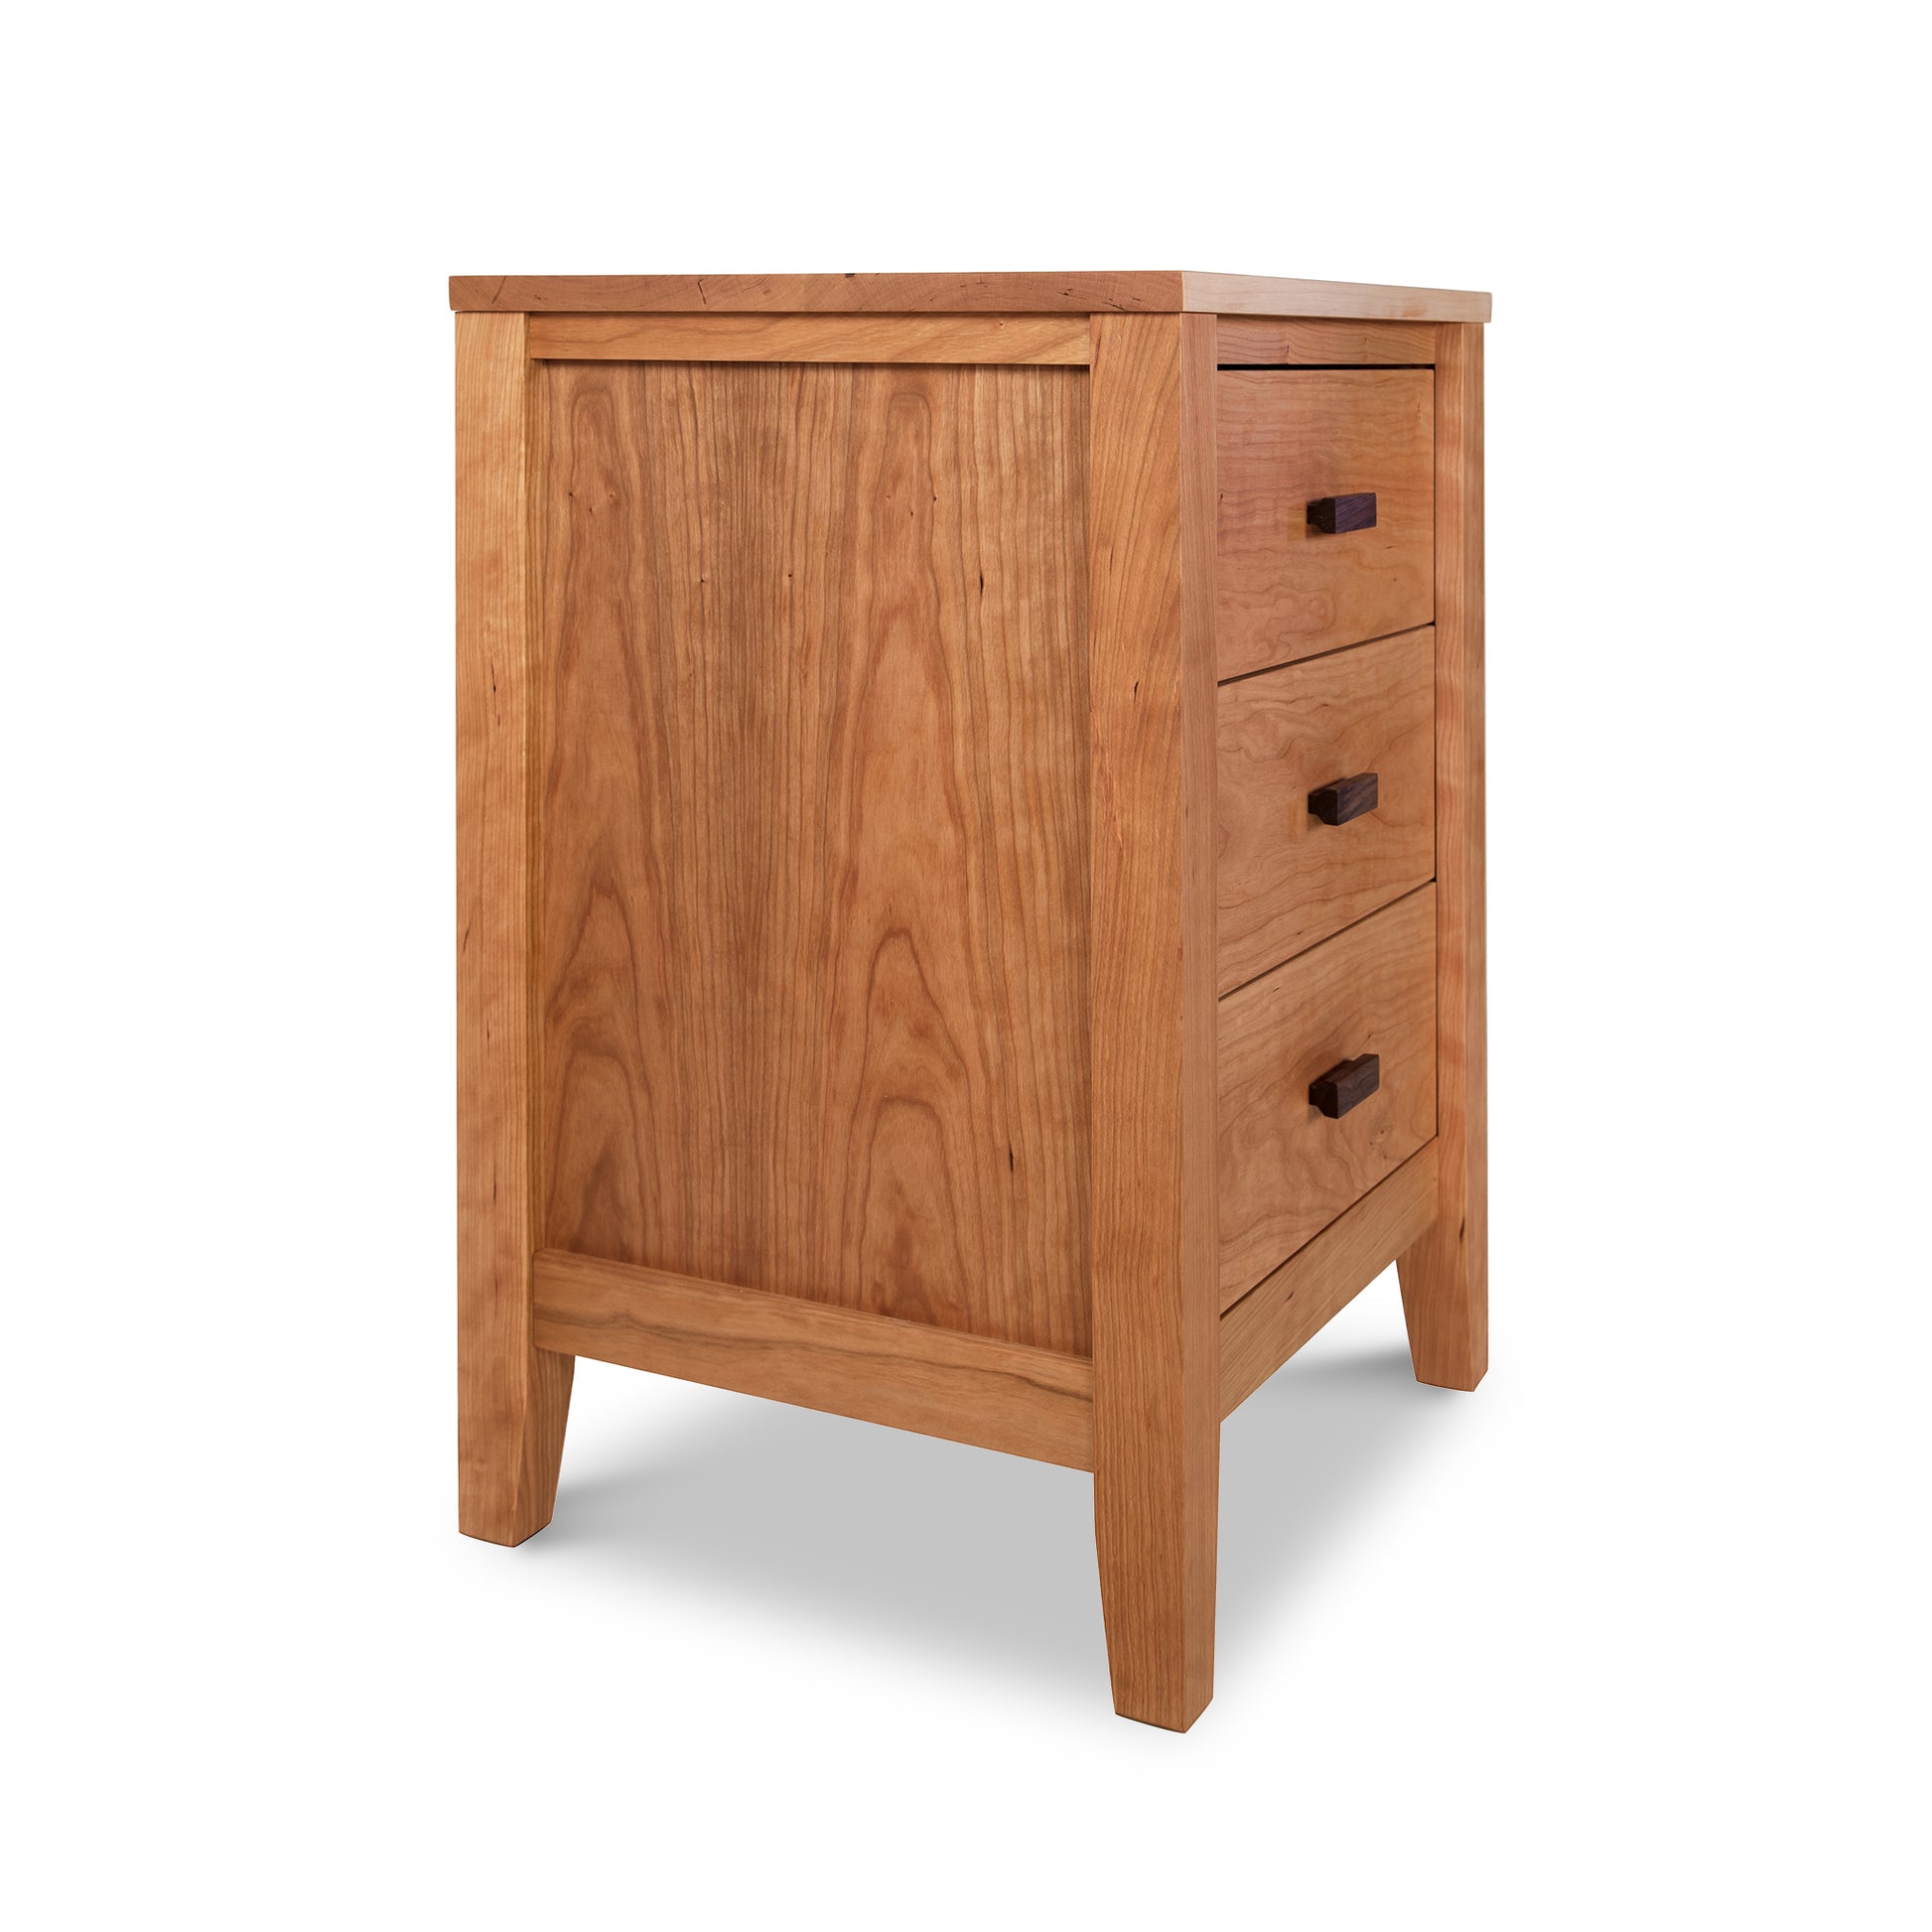 A Maple Corner Woodworks Andover Modern 3-Drawer Nightstand, with a single door and three drawers, each fitted with a black handle, standing against a white background. The nightstand, an eco-friendly furniture piece, is made of light brown, smooth wood.